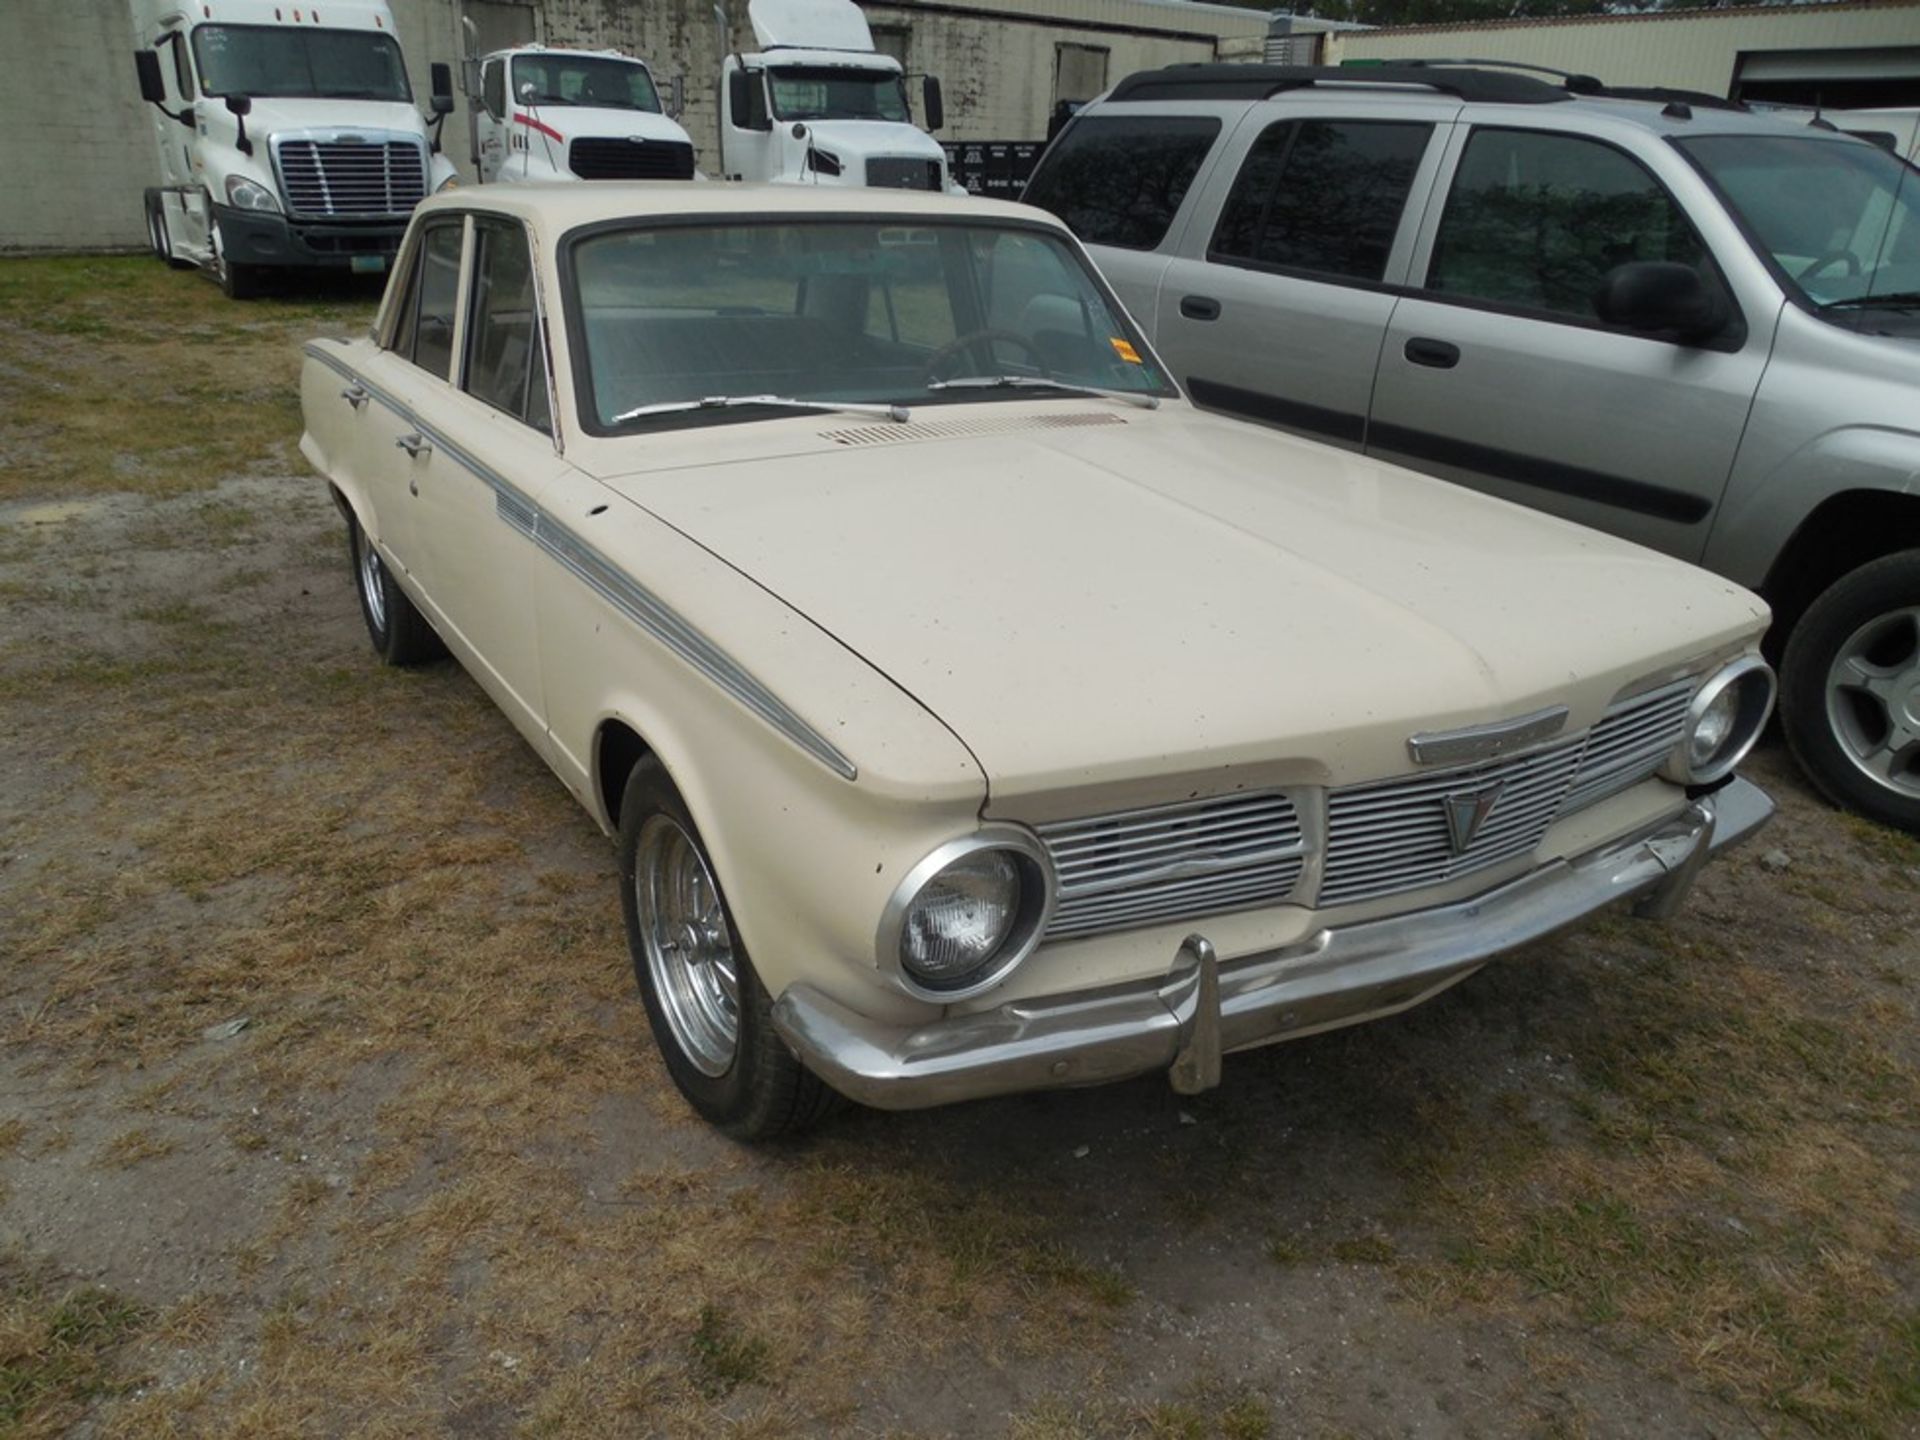 1965 Plymouth Valiant vin #52684599 - Image 3 of 5